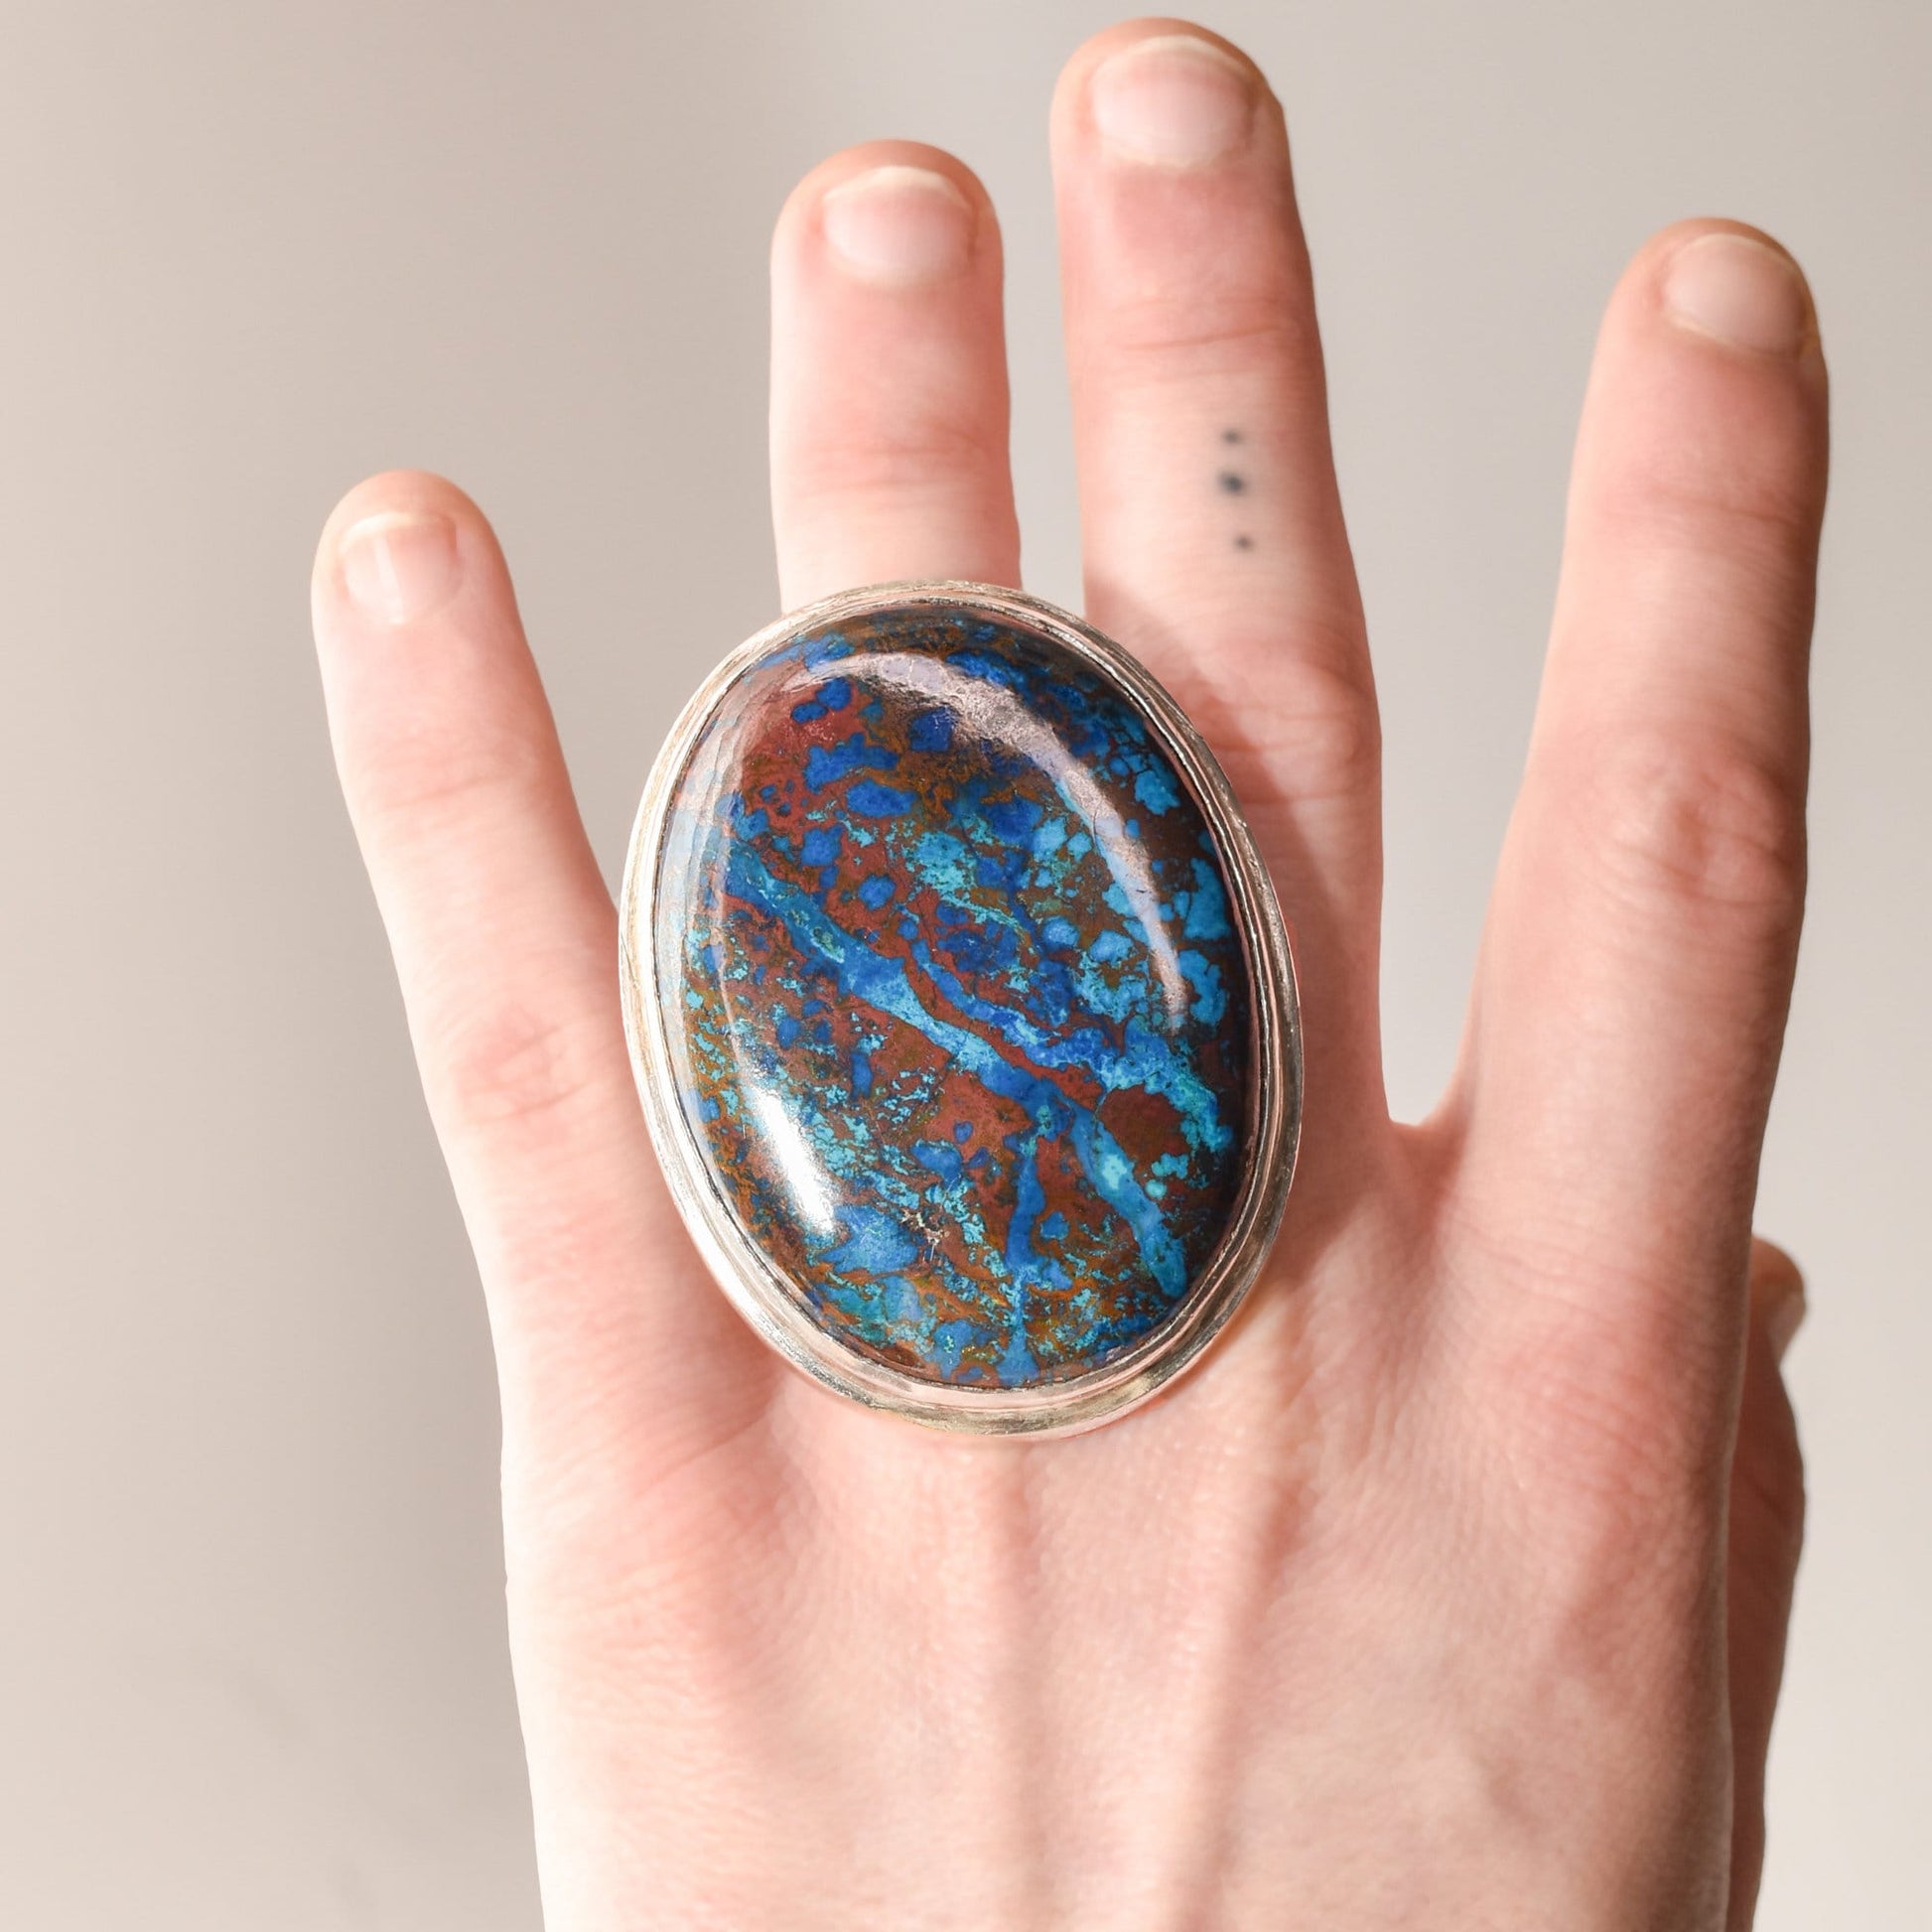 Huge sterling silver ring with blue matrix cabochon gemstone on a person's hand, statement jewelry size 7 3/4 US.